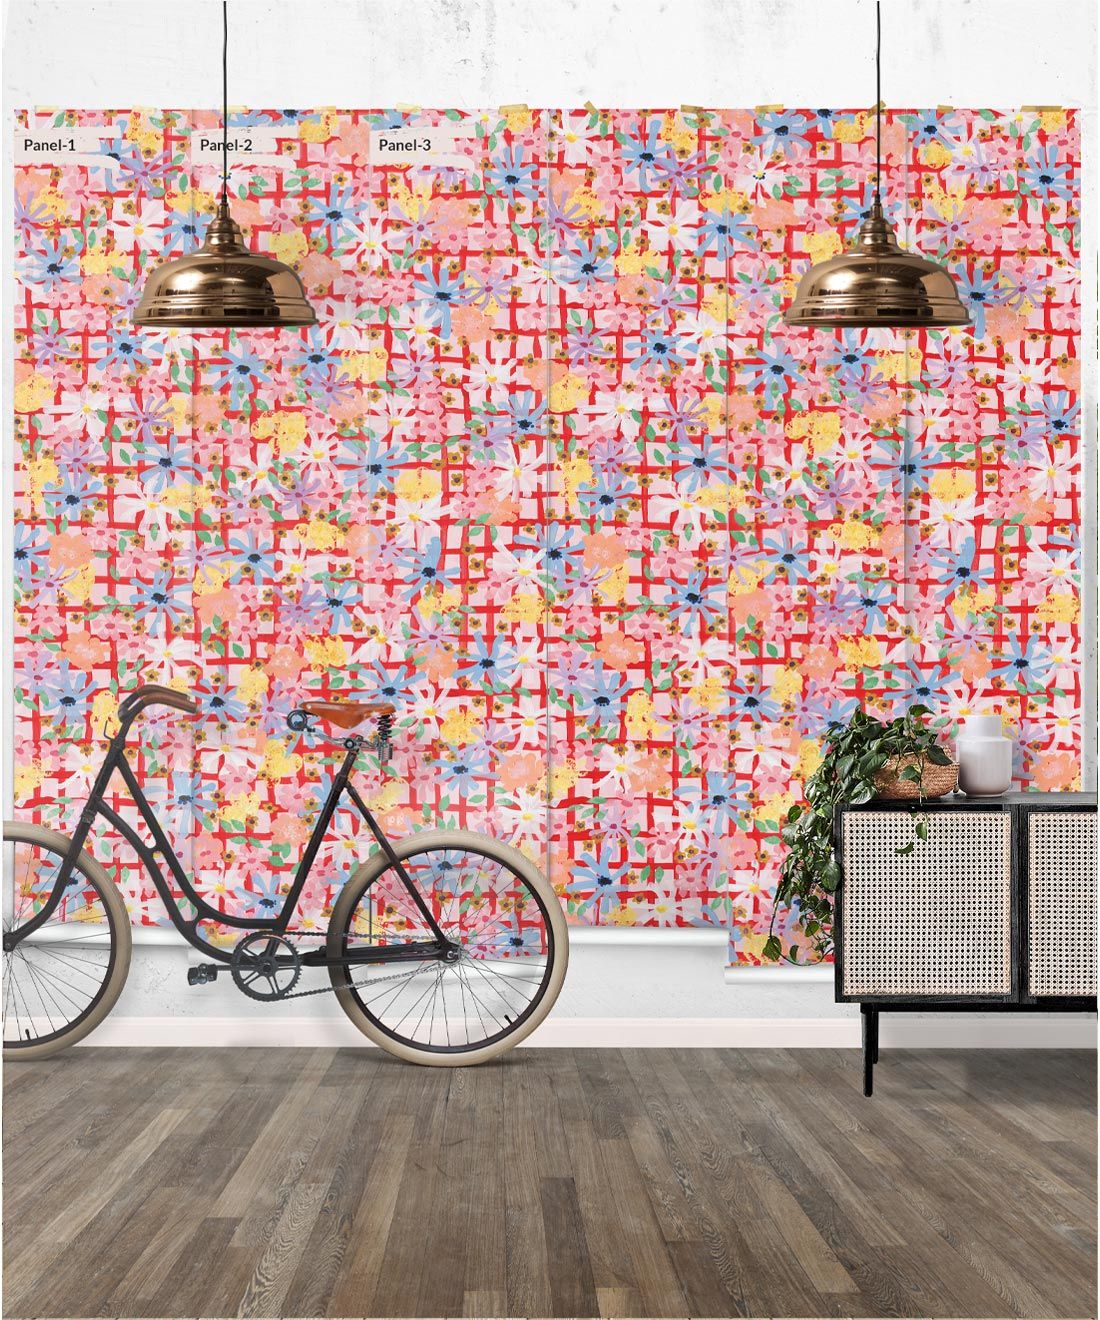 Bees Knees Wallpaper • Tiff Manuell • Colorful Geometric Wallpaper • insitu with table